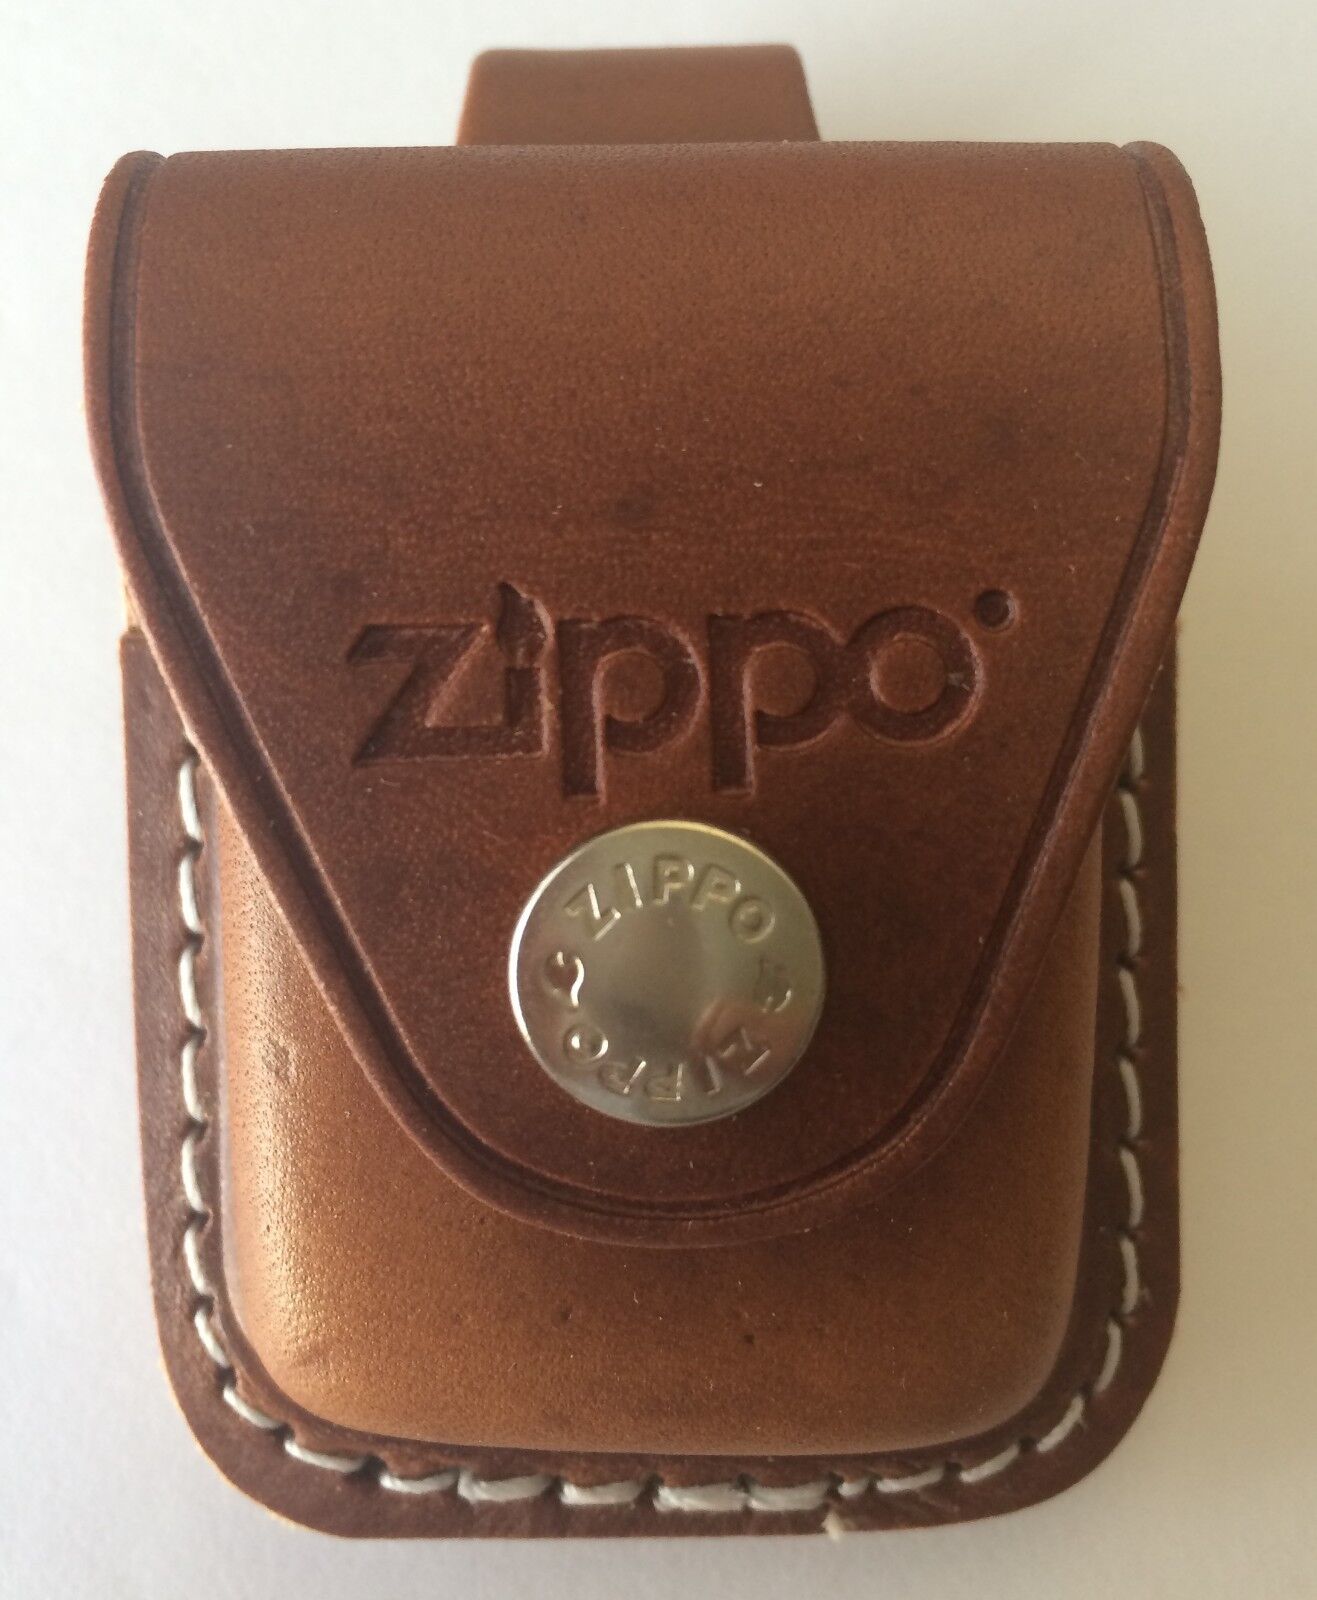 Zippo Brown Leather Lighter Pouch With Belt Loop, LPLB, New In Box